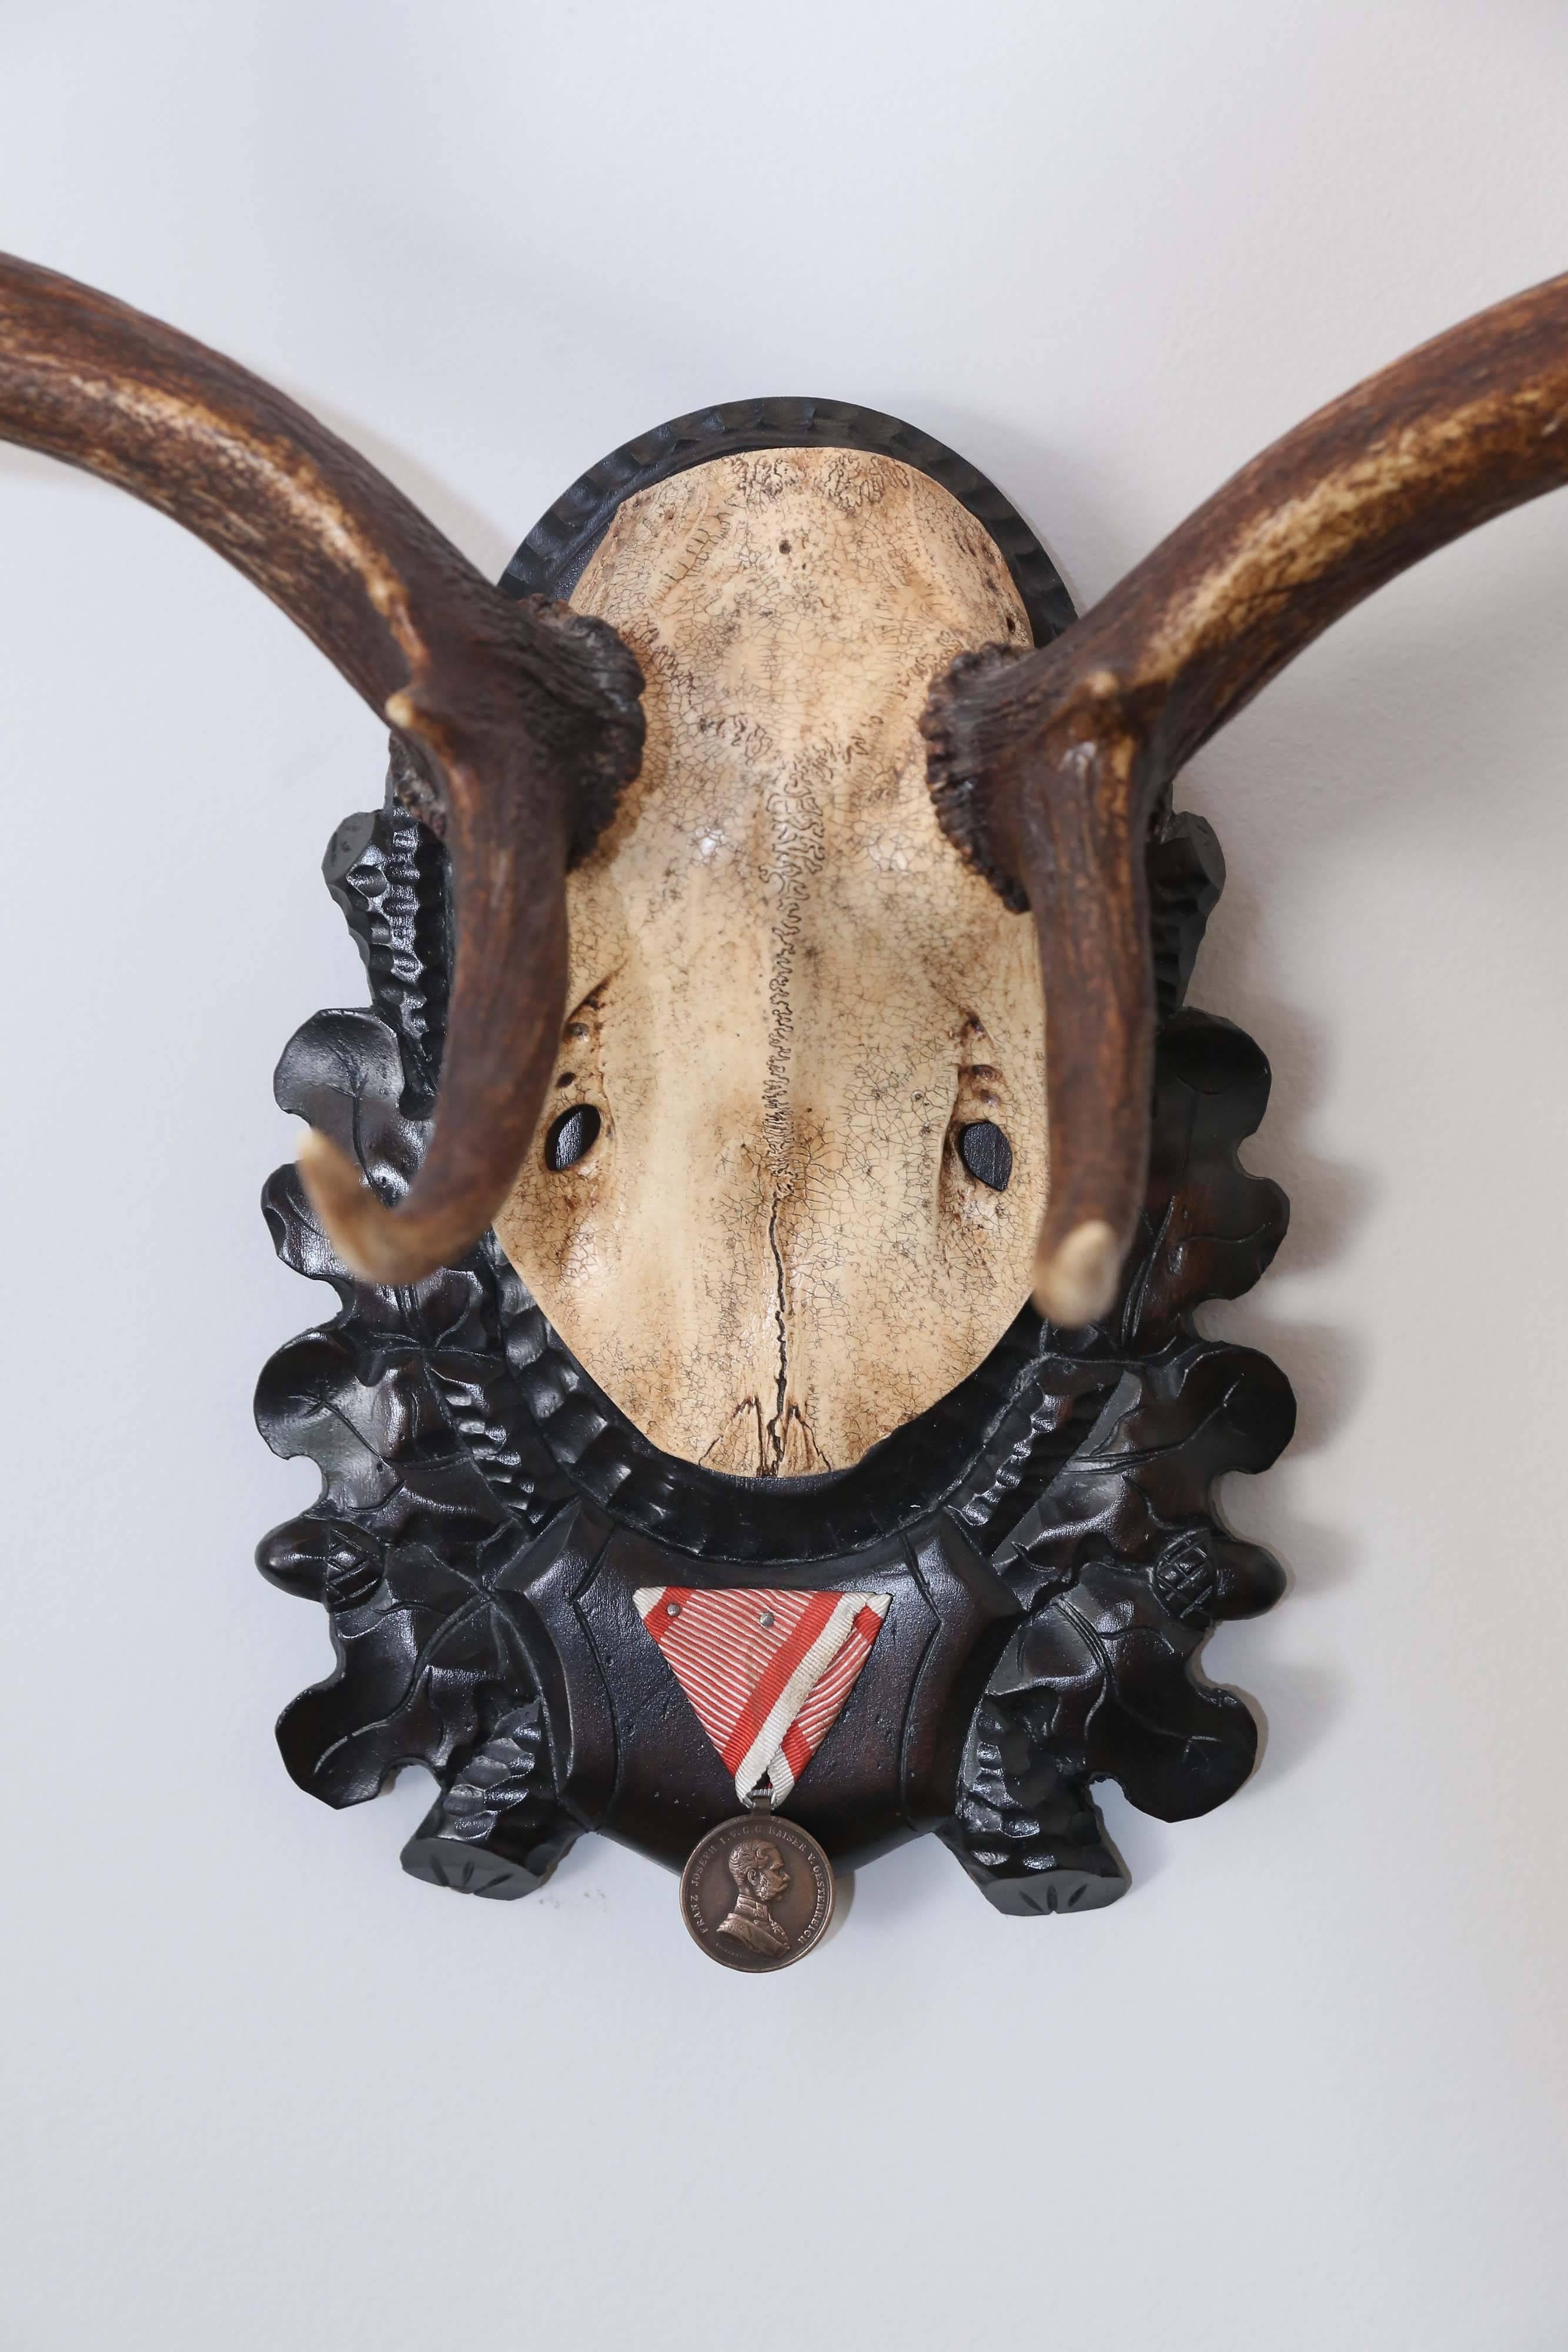 19th century fallow deer trophy with original medal from Emperor Franz Josef's castle at Eckartsau in the Southern Austrian Alps, a favourite hunting schloss of the Habsburg Royal family. This historic hunting trophy features the original black